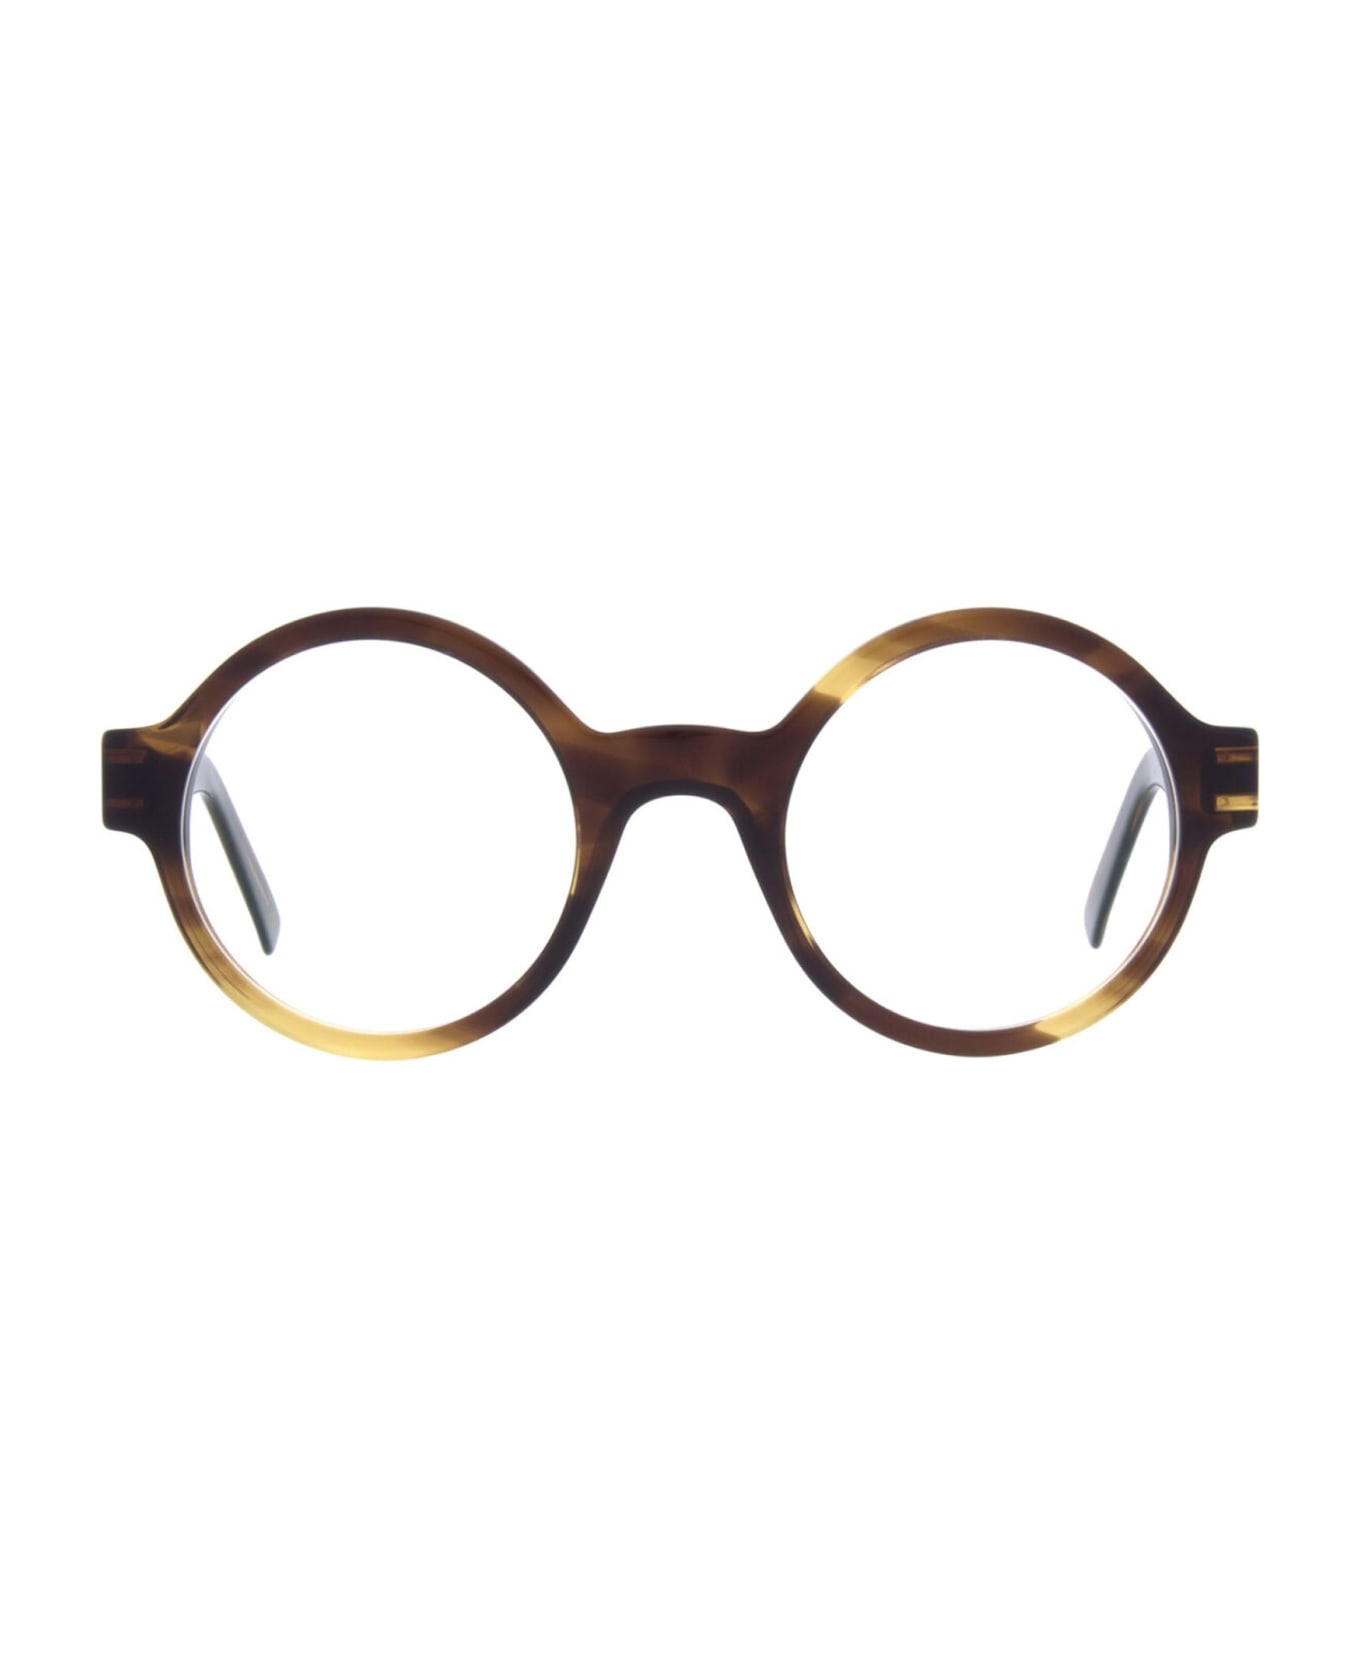 Andy Wolf Aw02 - Brown / Gold Glasses - brown